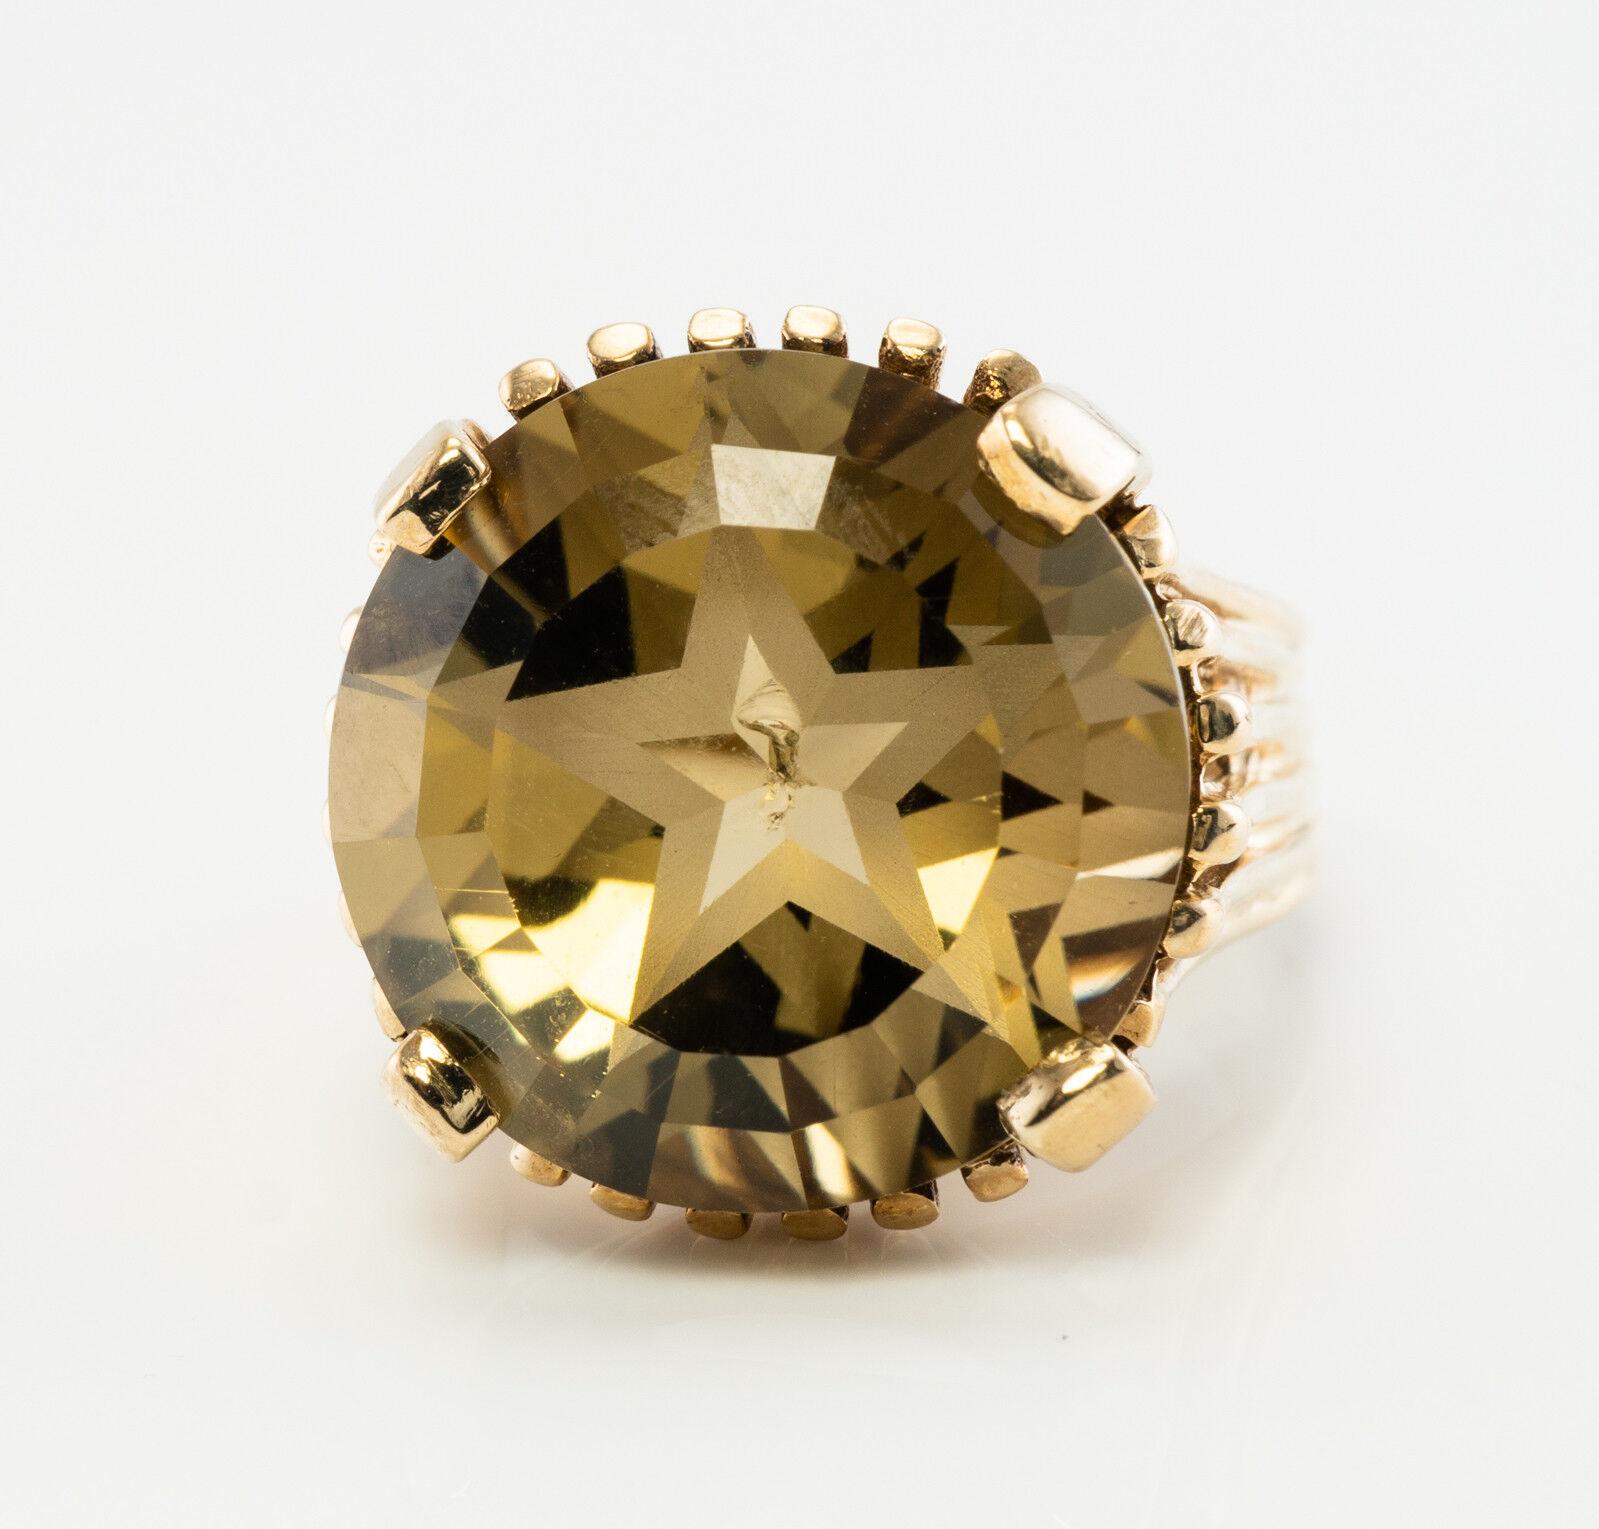 Lemon Quartz Crystal Star Ring 10K Gold Band Cocktail

This gorgeous quartz ring is finely crafted in solid 10K Yellow gold (stamped and carefully tested and guaranteed) and set with genuine Lemon Quartz. We usually don't buy 10K Gold jewelry but we